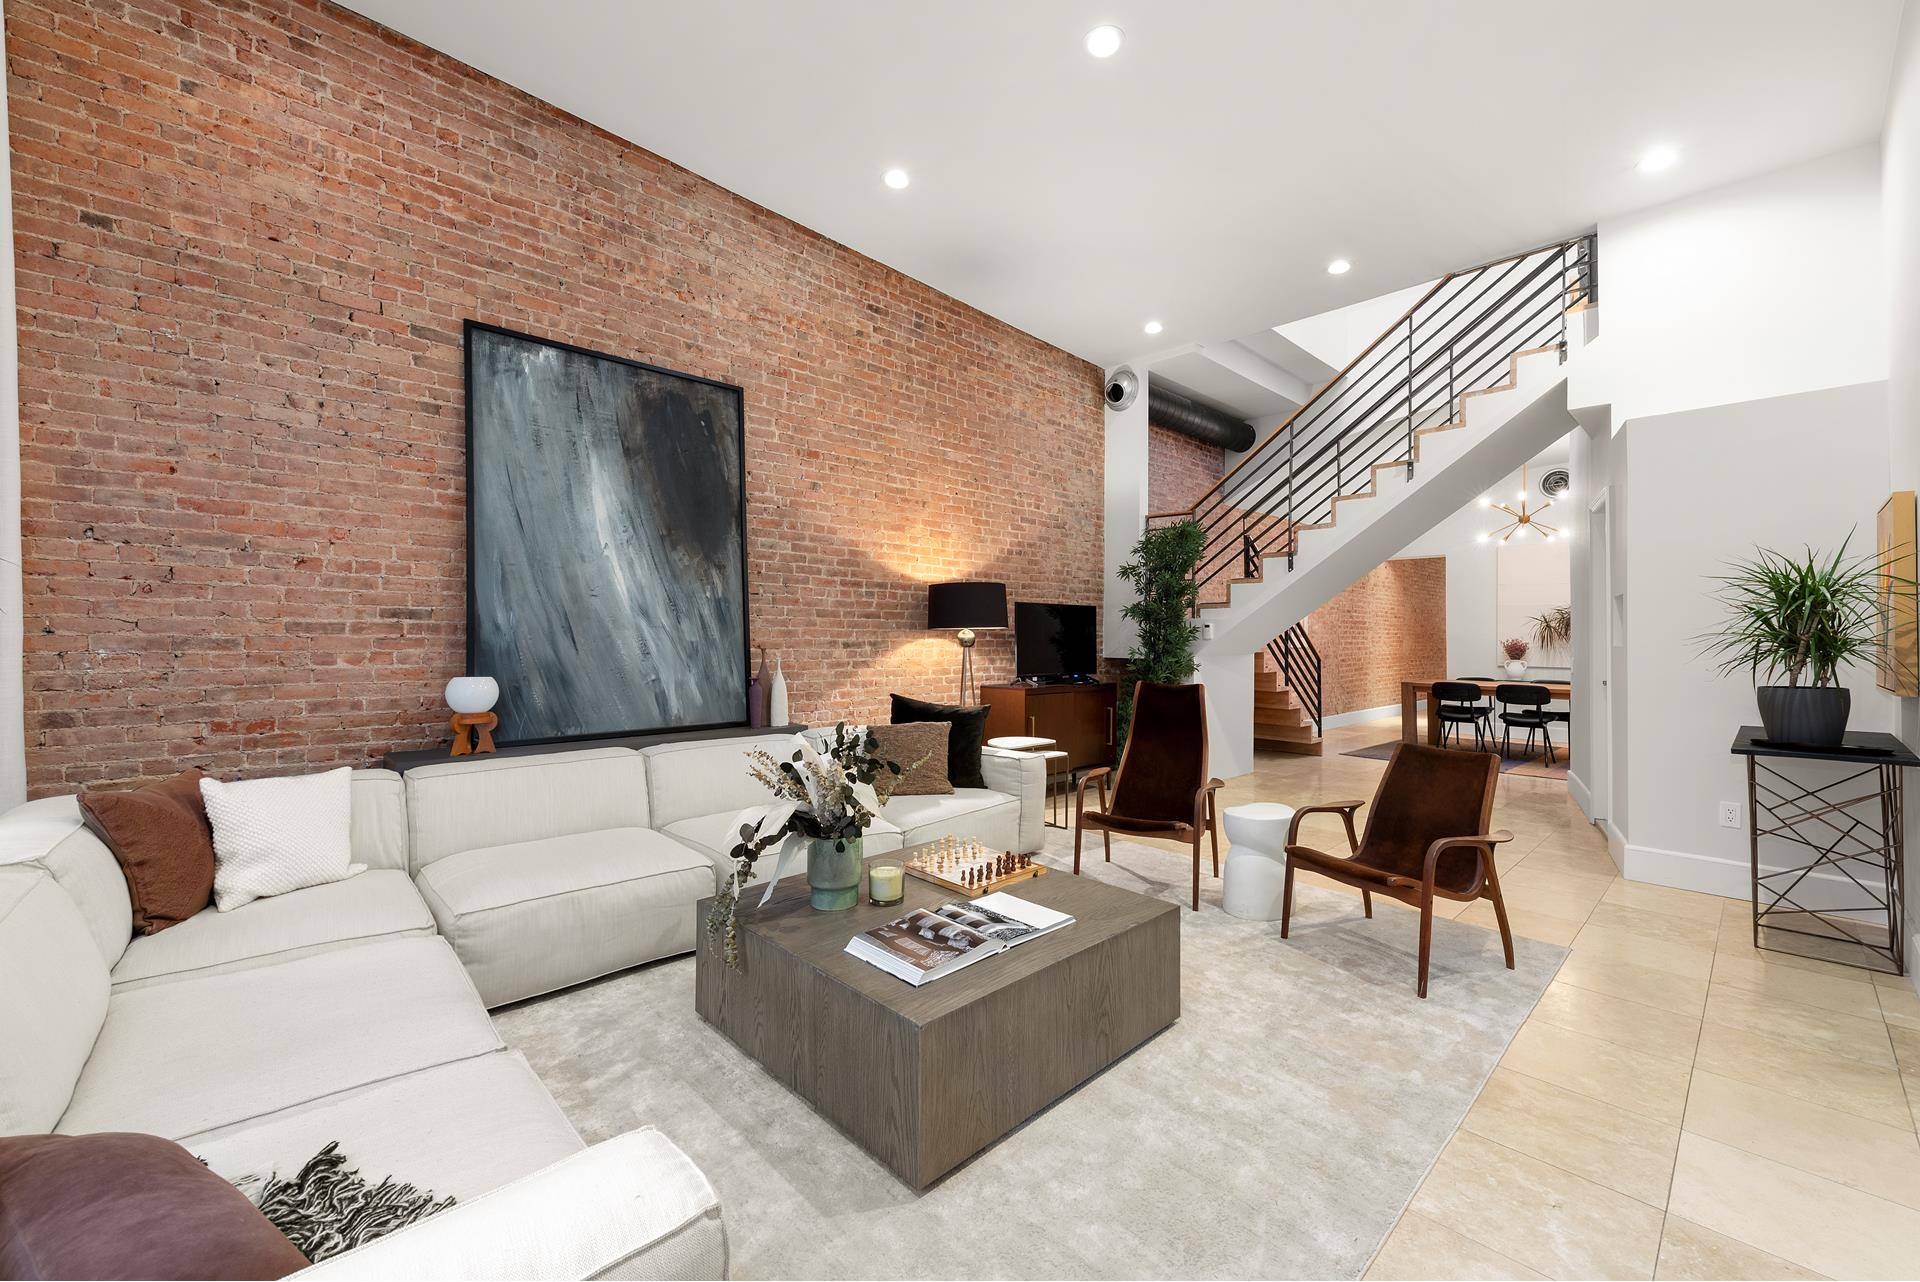 Tribeca penthouse condominium in mint condition has three bedrooms, three full baths, powder room, private laundry, central air and two fabulous private terraces.